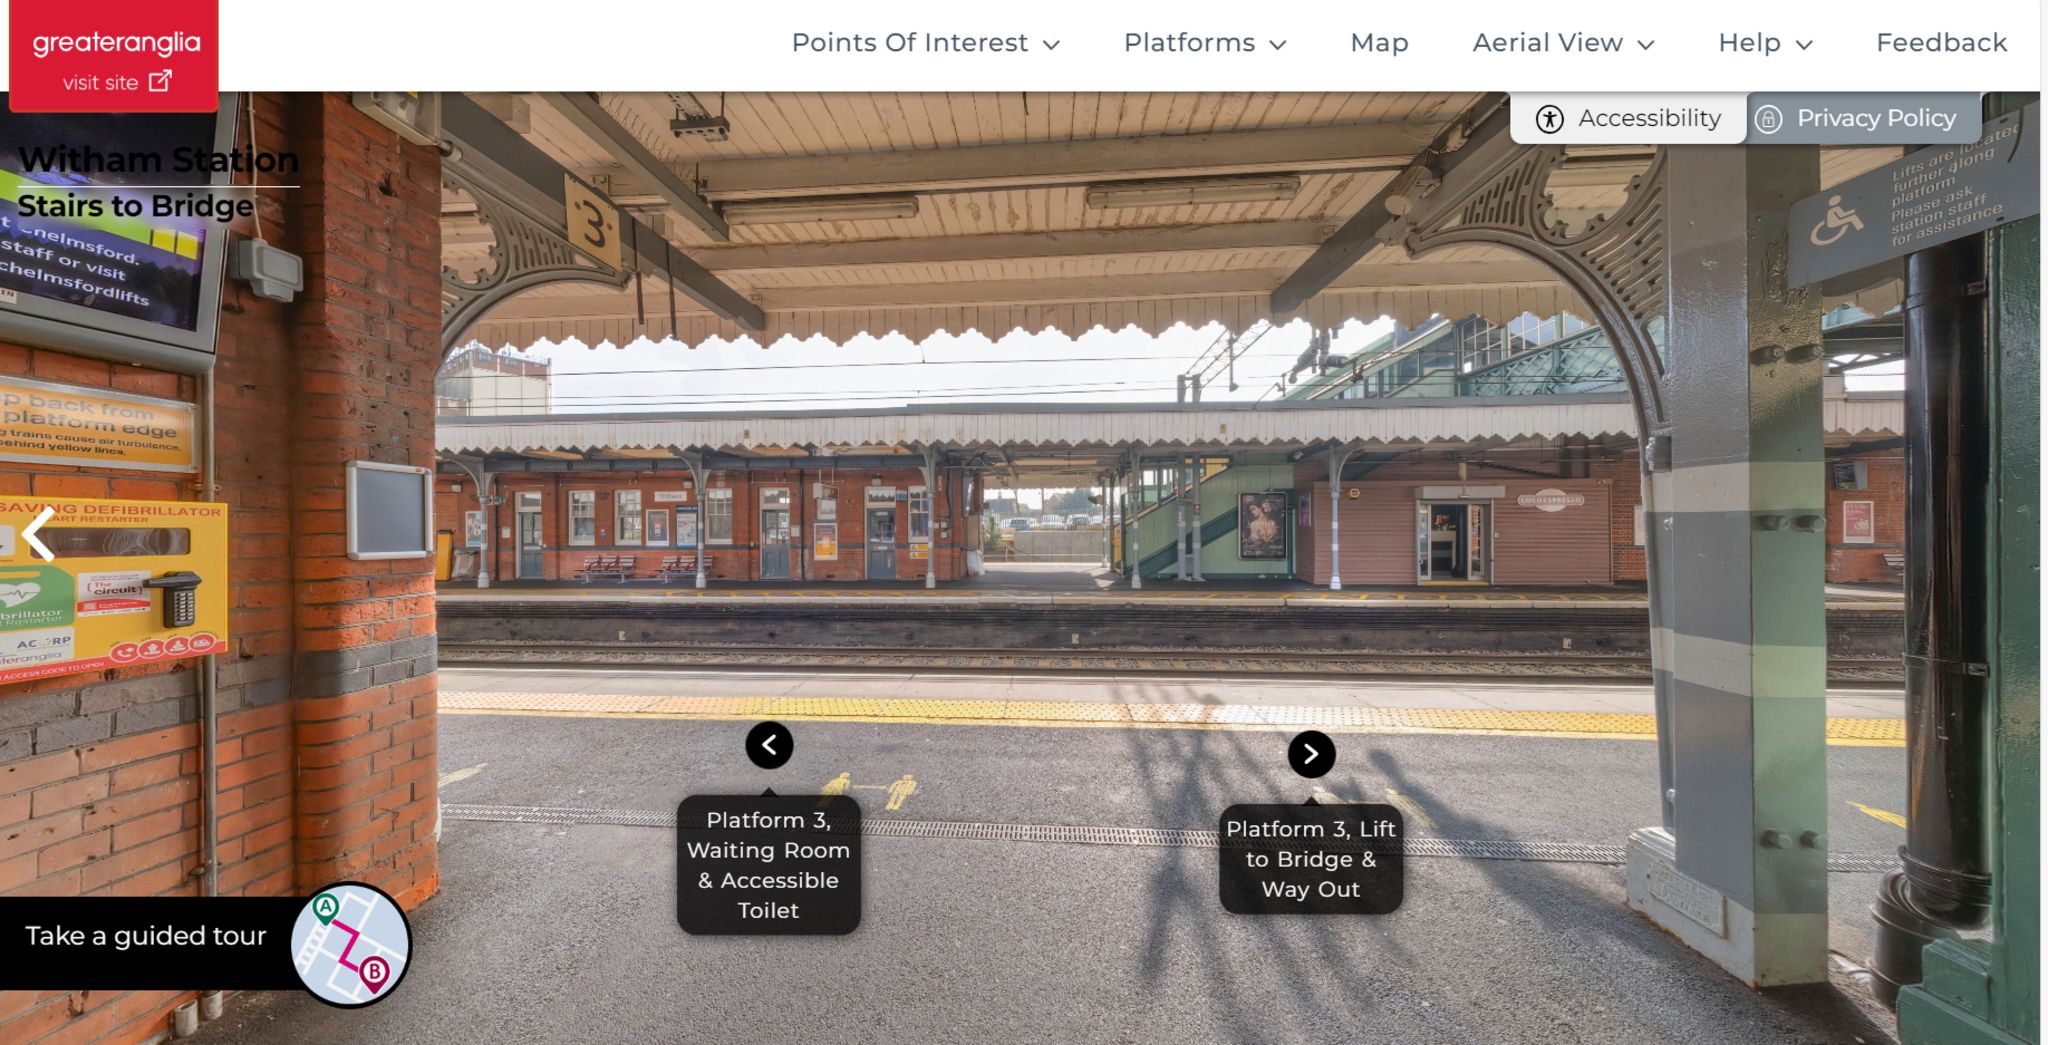 A screenshot of the open station platform at Witham railway station via the virtual tour. It shows the open platform with arrows indicating to the platform's lift and waiting room.